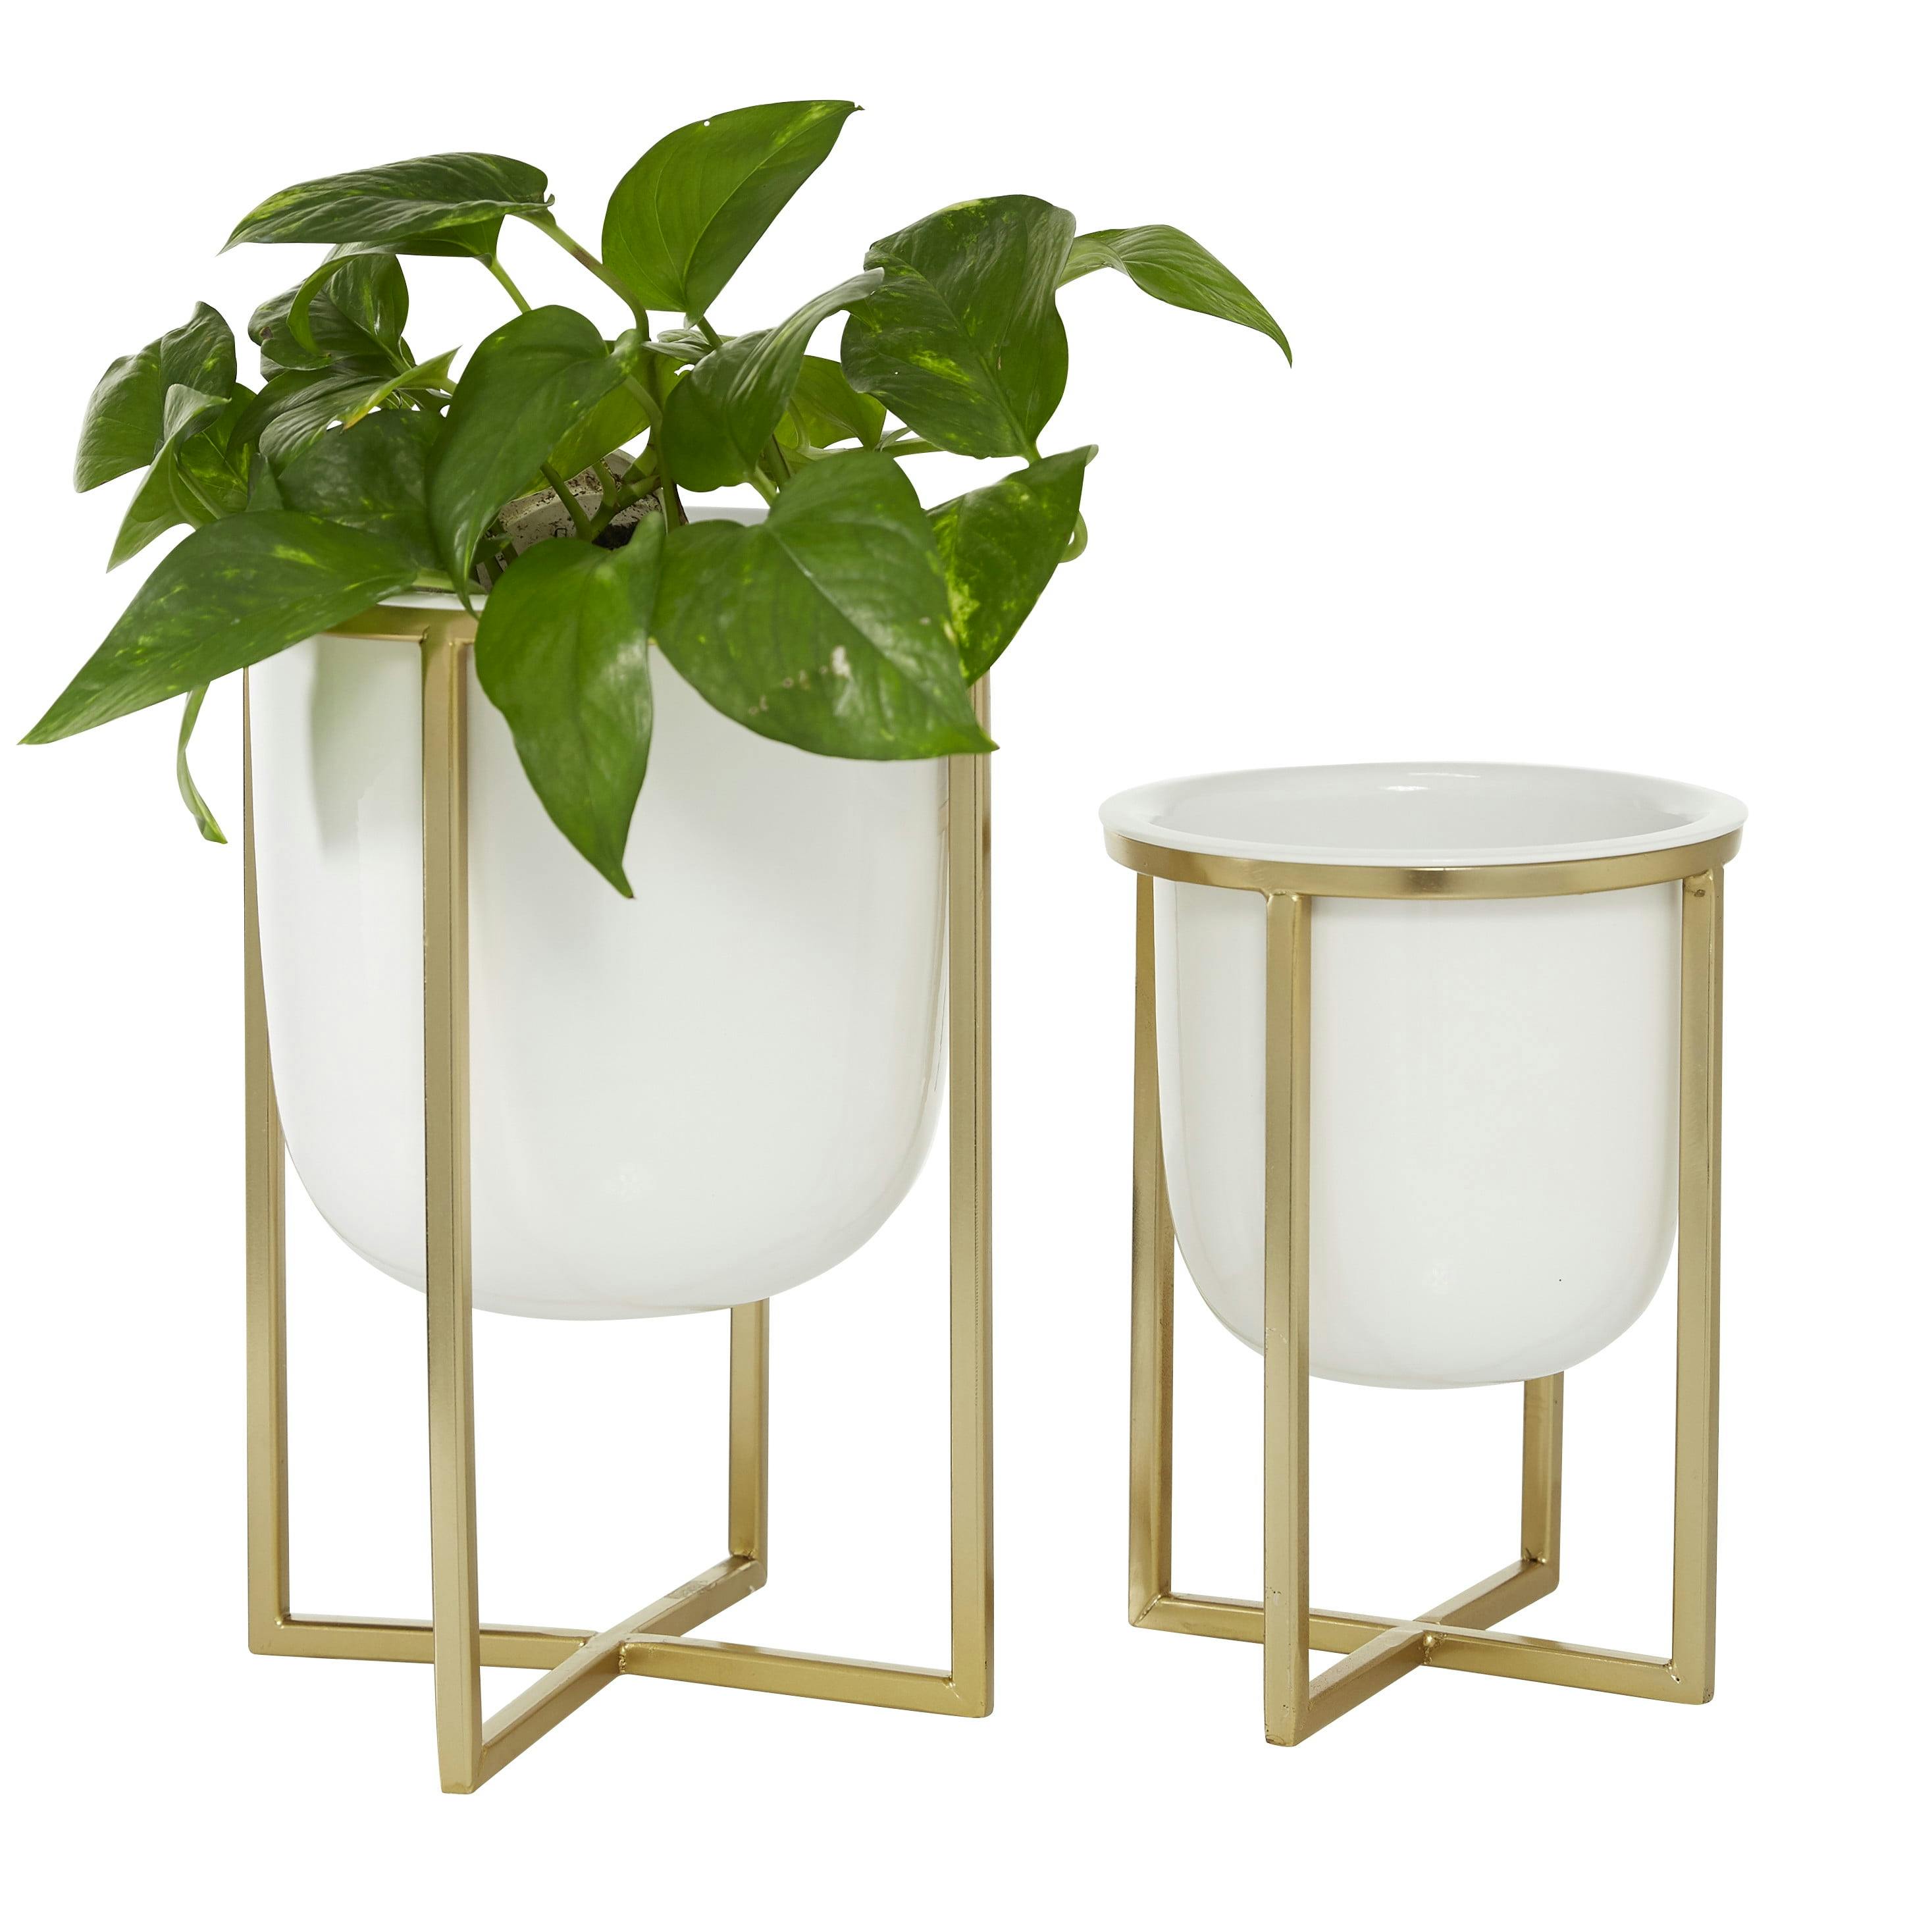 Contemporary White and Gold Metal Planter Set with Removable Stands